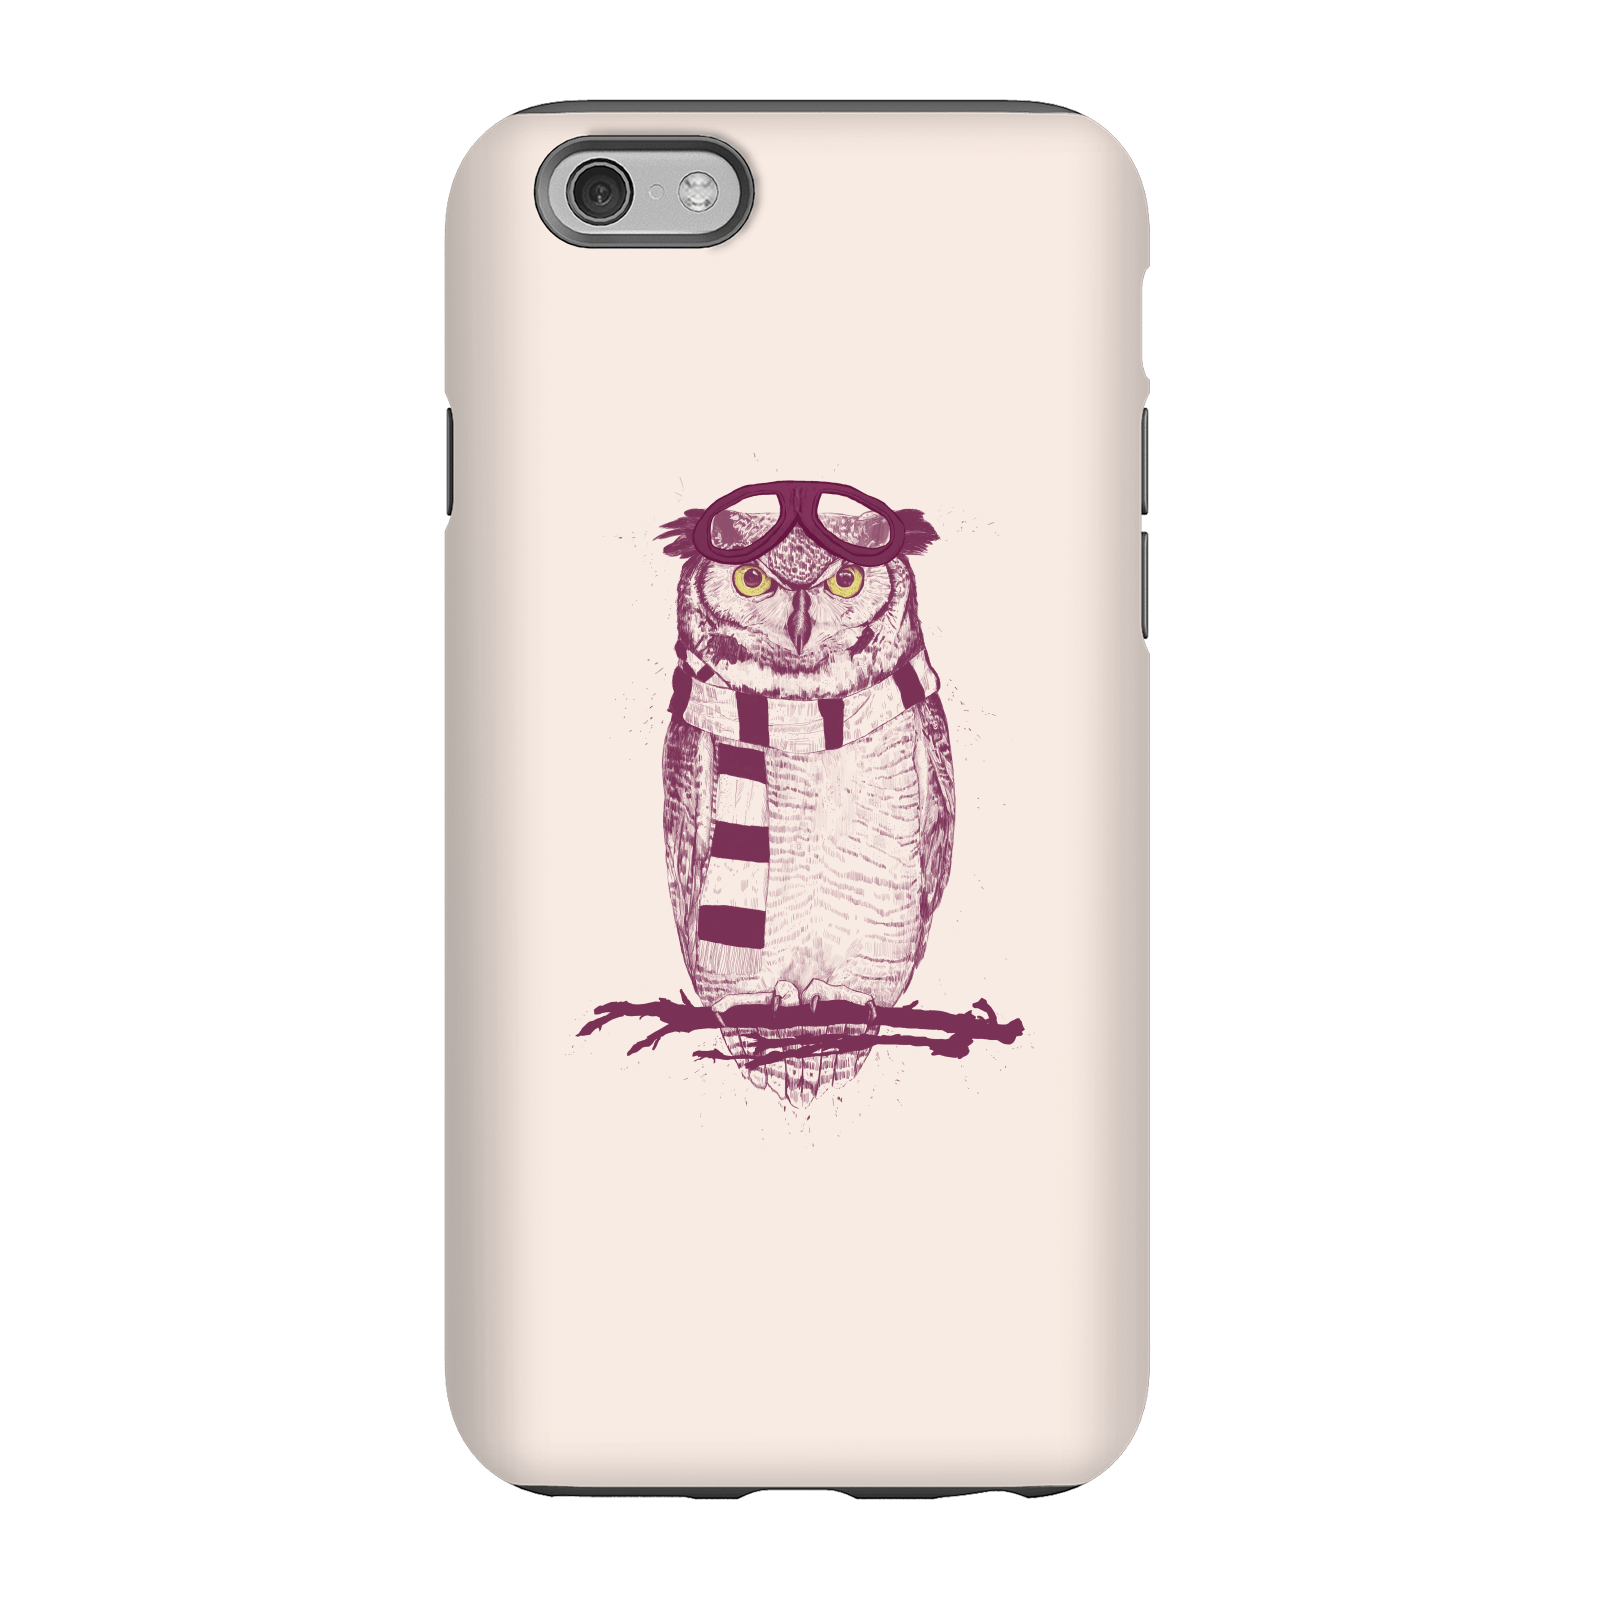 Balazs Solti Winter Owl Phone Case for iPhone and Android - iPhone 6 - Tough Case - Matte